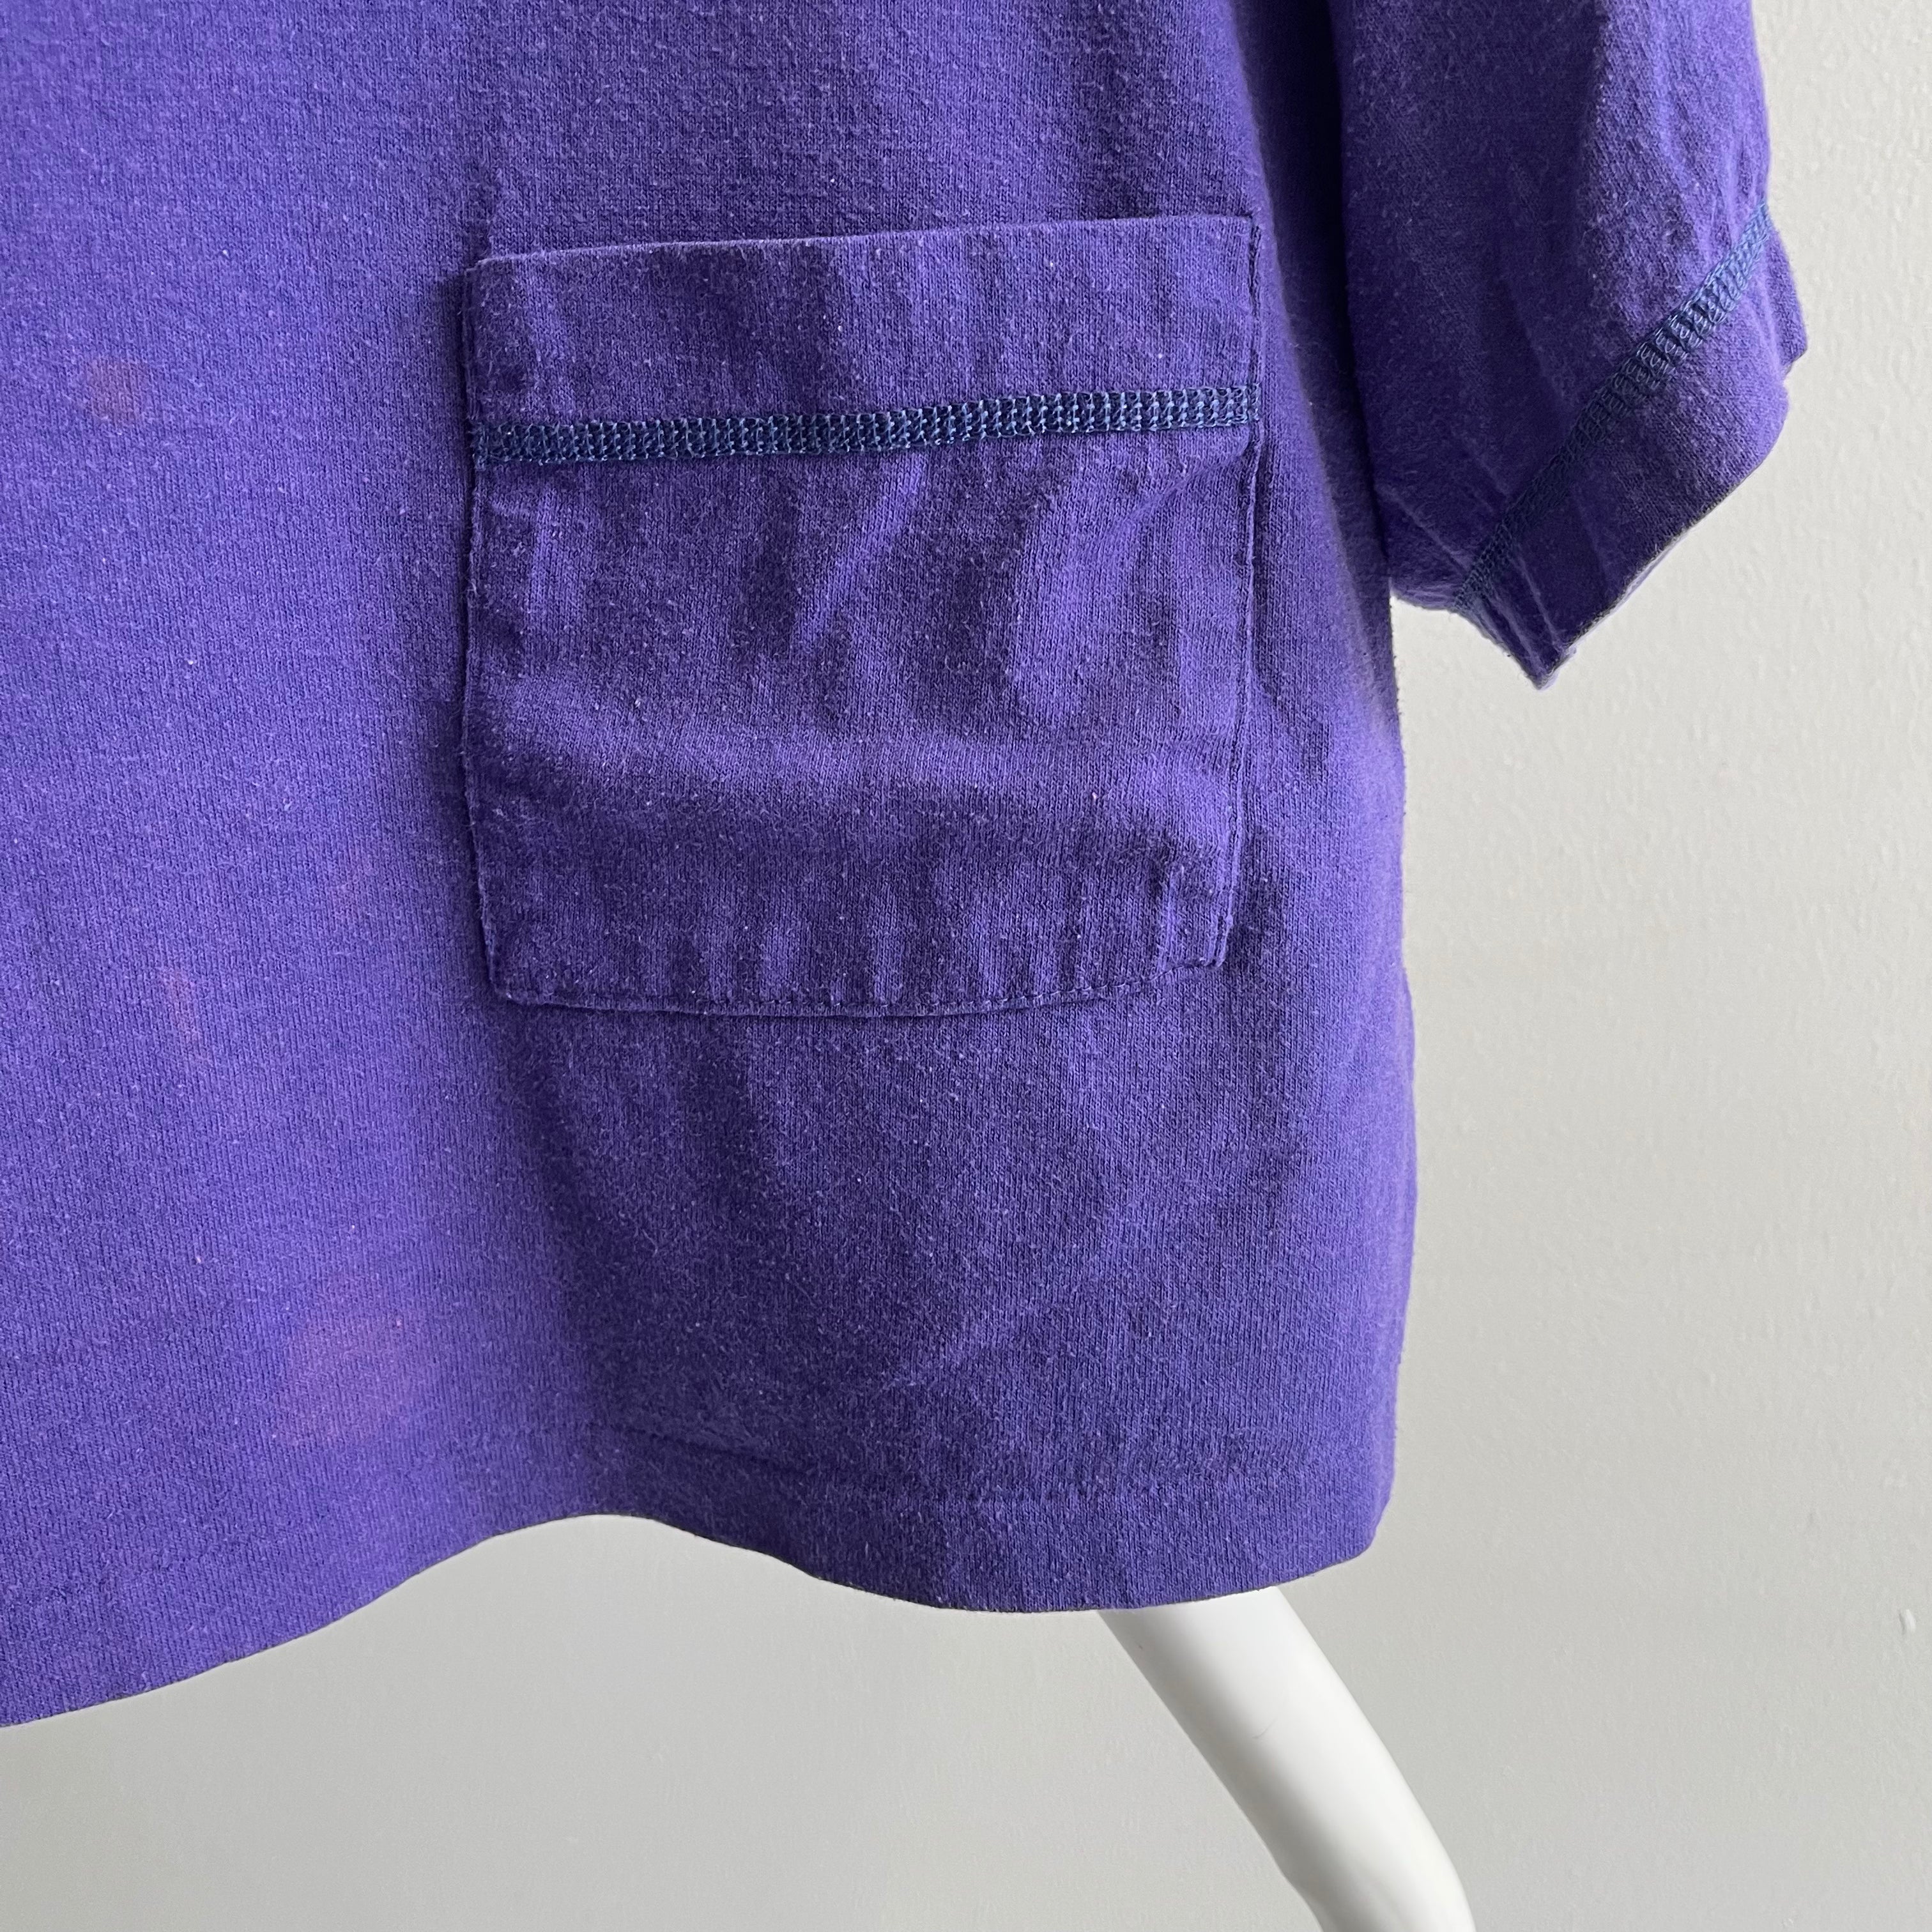 1980s Purple Cotton Pocket Crop Top with Contrast Stitching